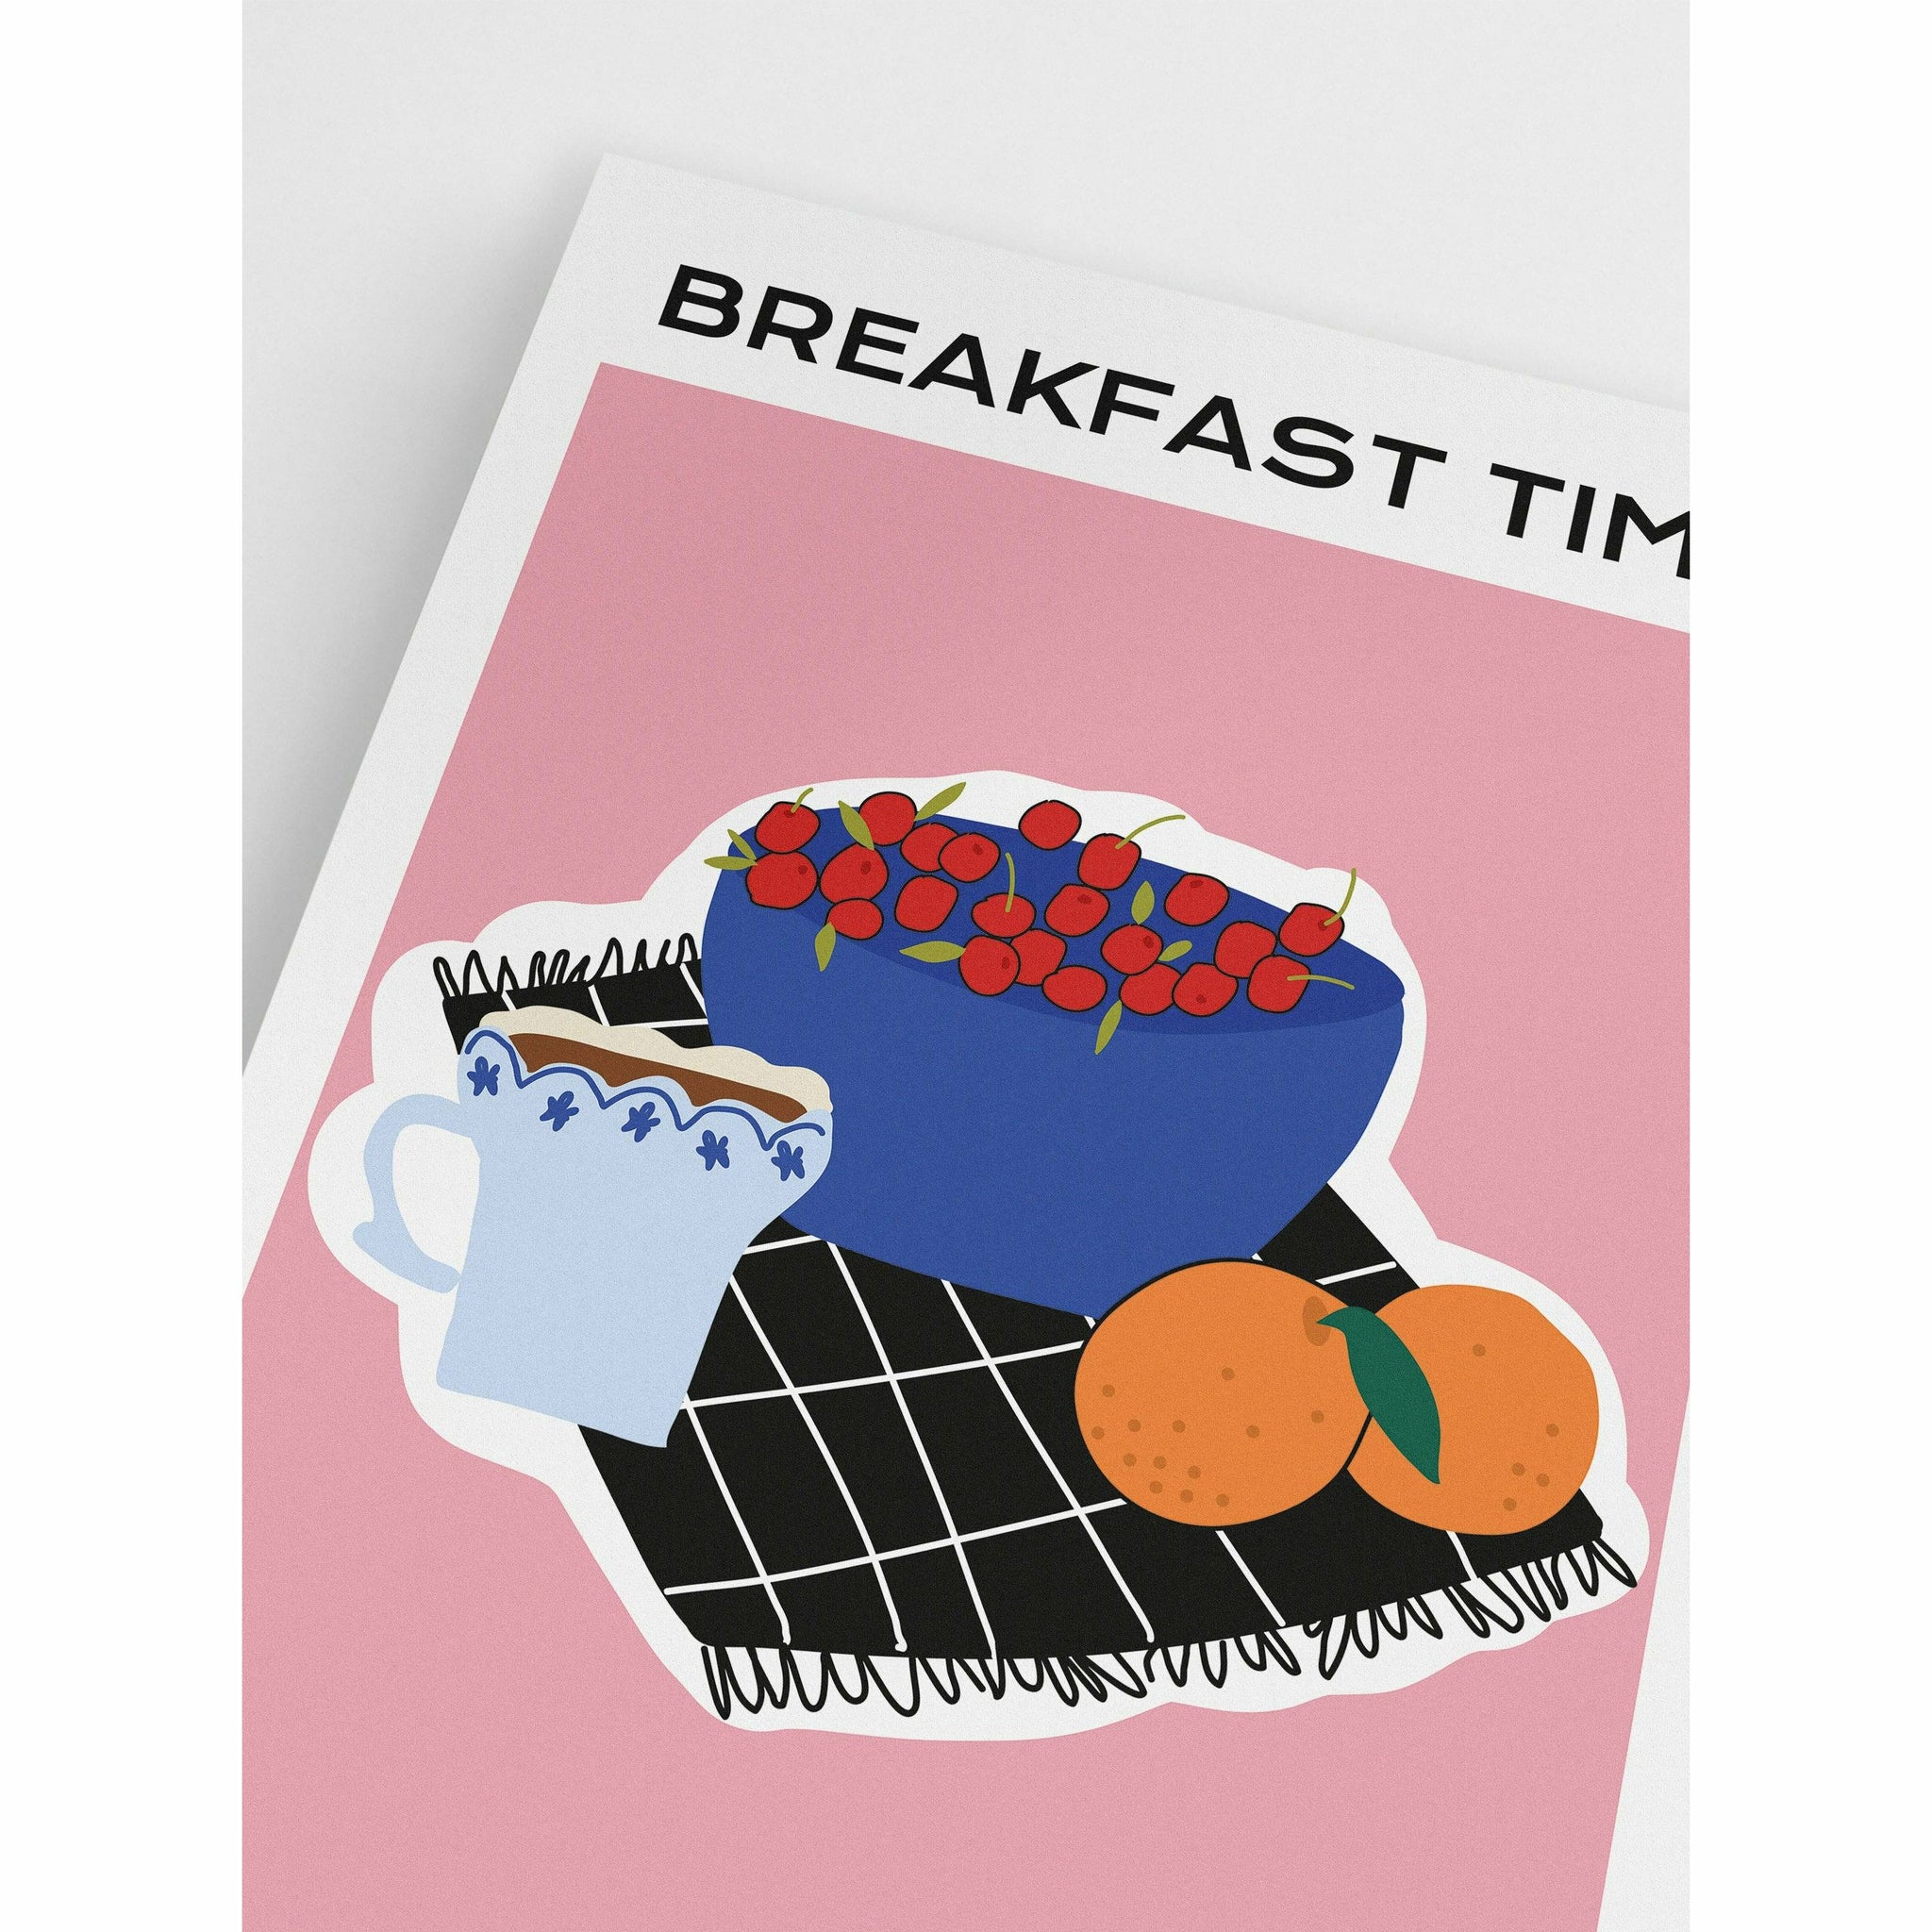 Breakfast Time Poster